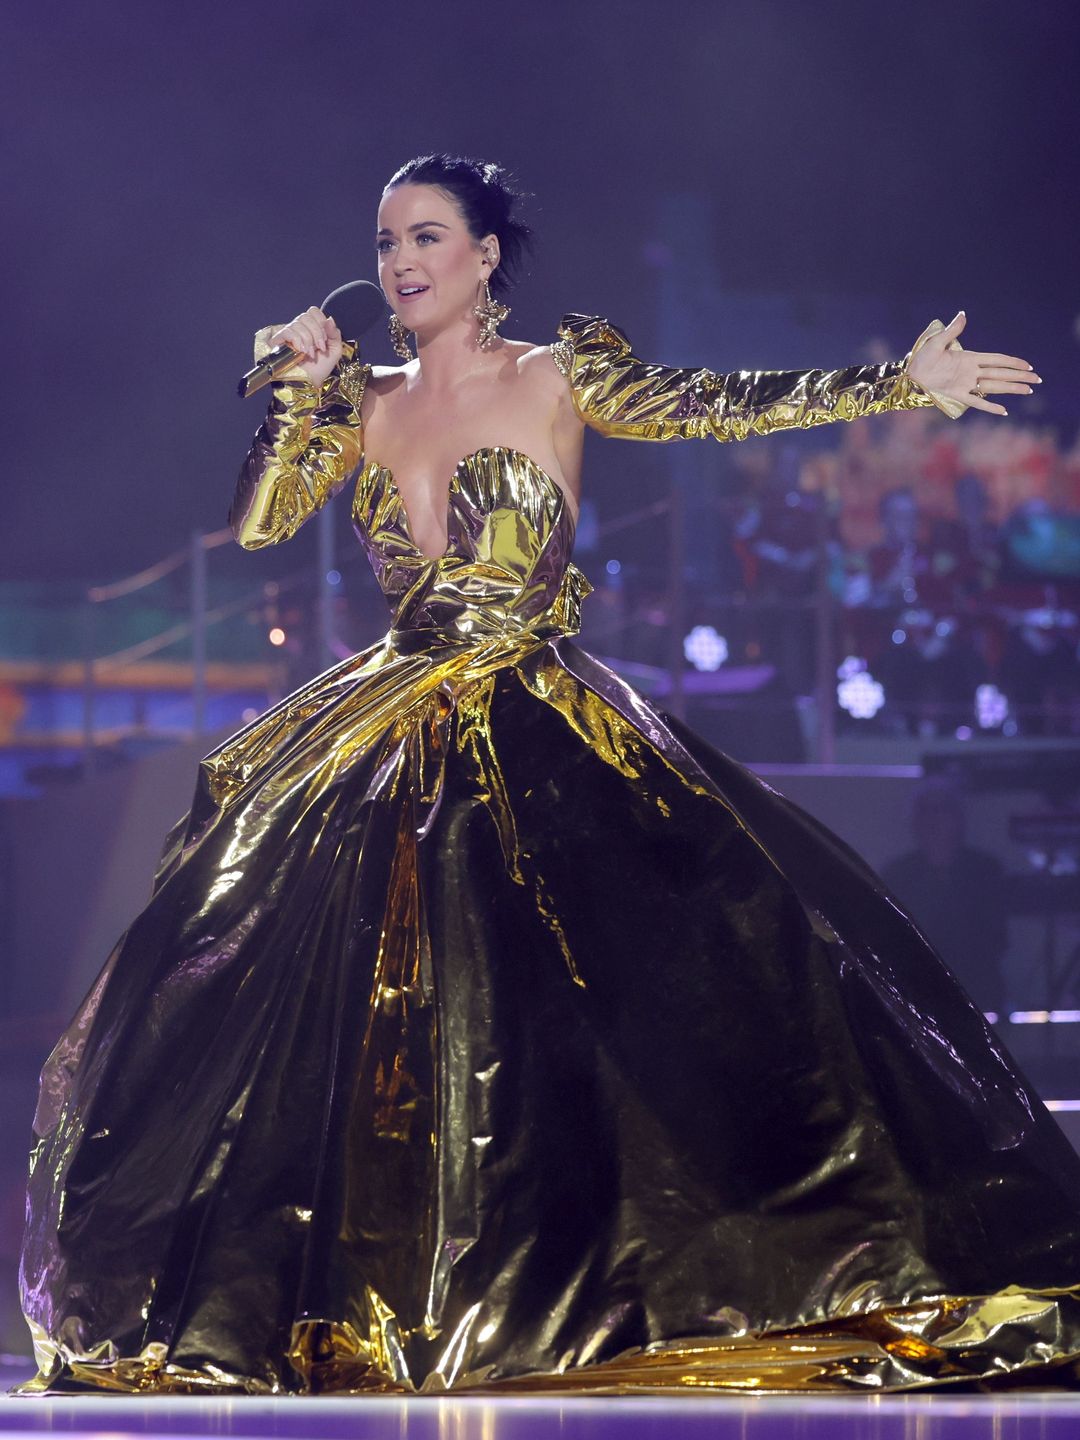 WINDSOR, ENGLAND - MAY 07: Katy Perry performs on stage during the Coronation Concert on May 07, 2023 in Windsor, England. The Windsor Castle Concert is part of the celebrations of the Coronation of Charles III and his wife, Camilla, as King and Queen of the United Kingdom of Great Britain and Northern Ireland, and the other Commonwealth realms that took place at Westminster Abbey yesterday. Performers include Take That, Lionel Richie, Katy Perry, Paloma Faith, Olly Murs, Andrea Bocelli and Sir Bryn Terfel, Alexis Ffrench, Lang Lang & Nicole Scherzinger, Bette Midler, Tiwa Savage, Steve Winwood, Pete Tong and The Coronation Choir. (Photo by Chris Jackson/Getty Images)